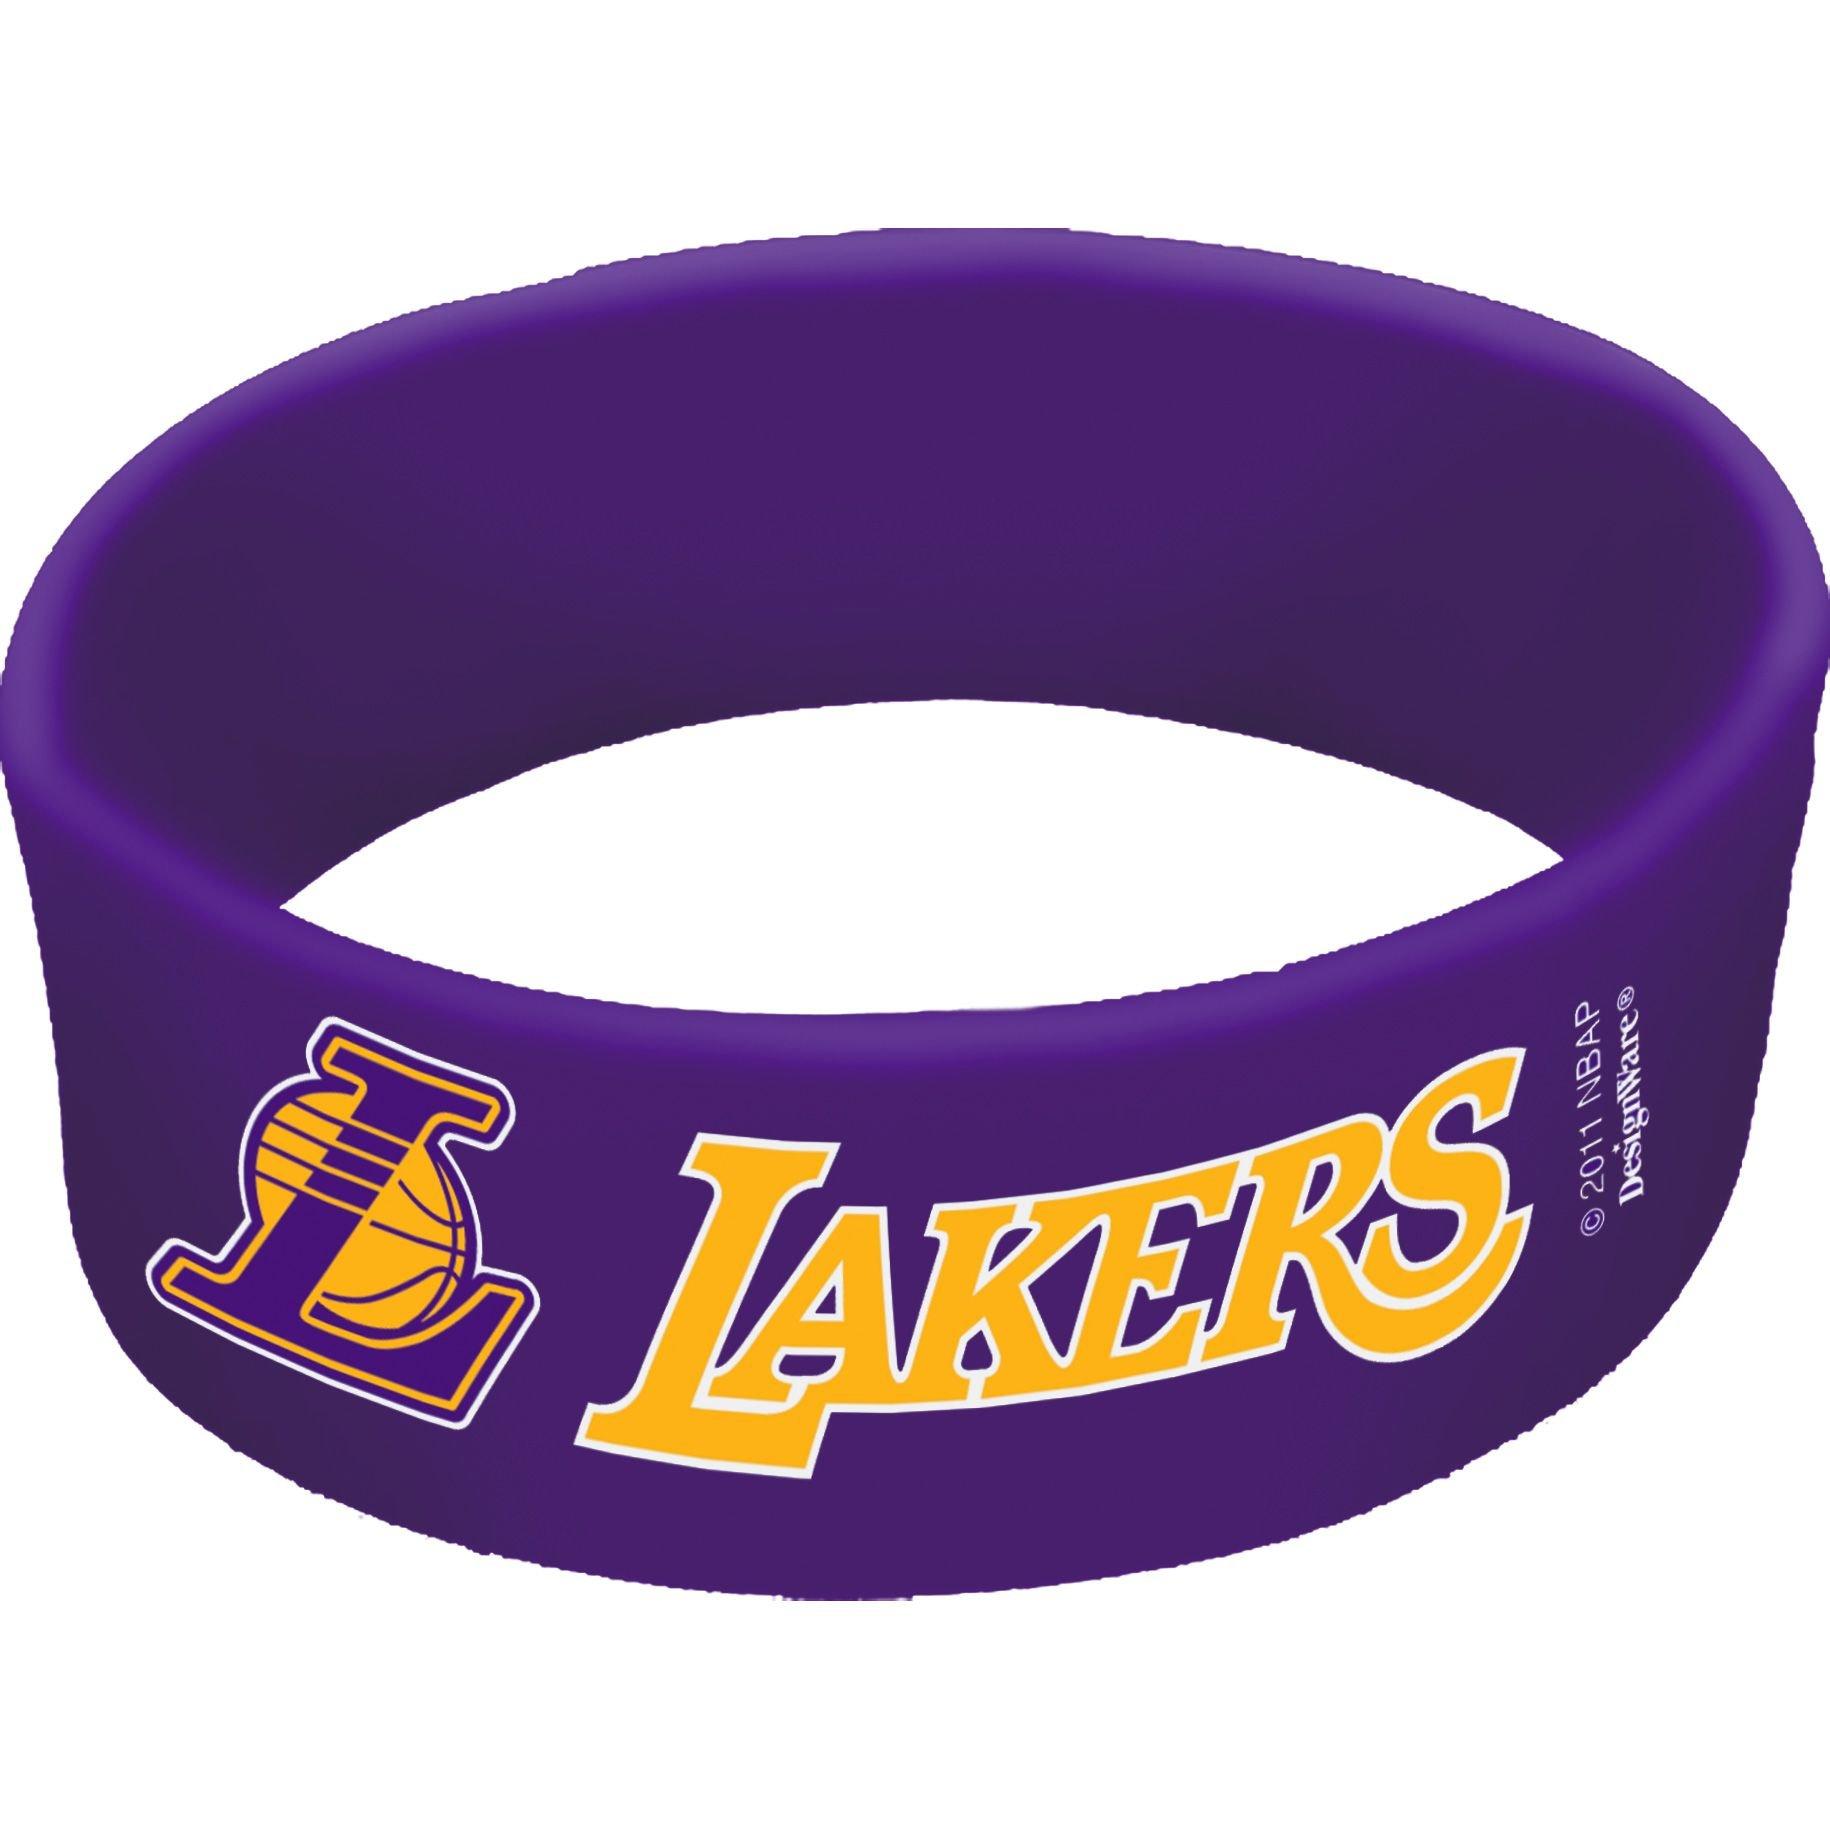 Los Angeles Lakers Fan Buying Guide, Gifts, Holiday Shopping